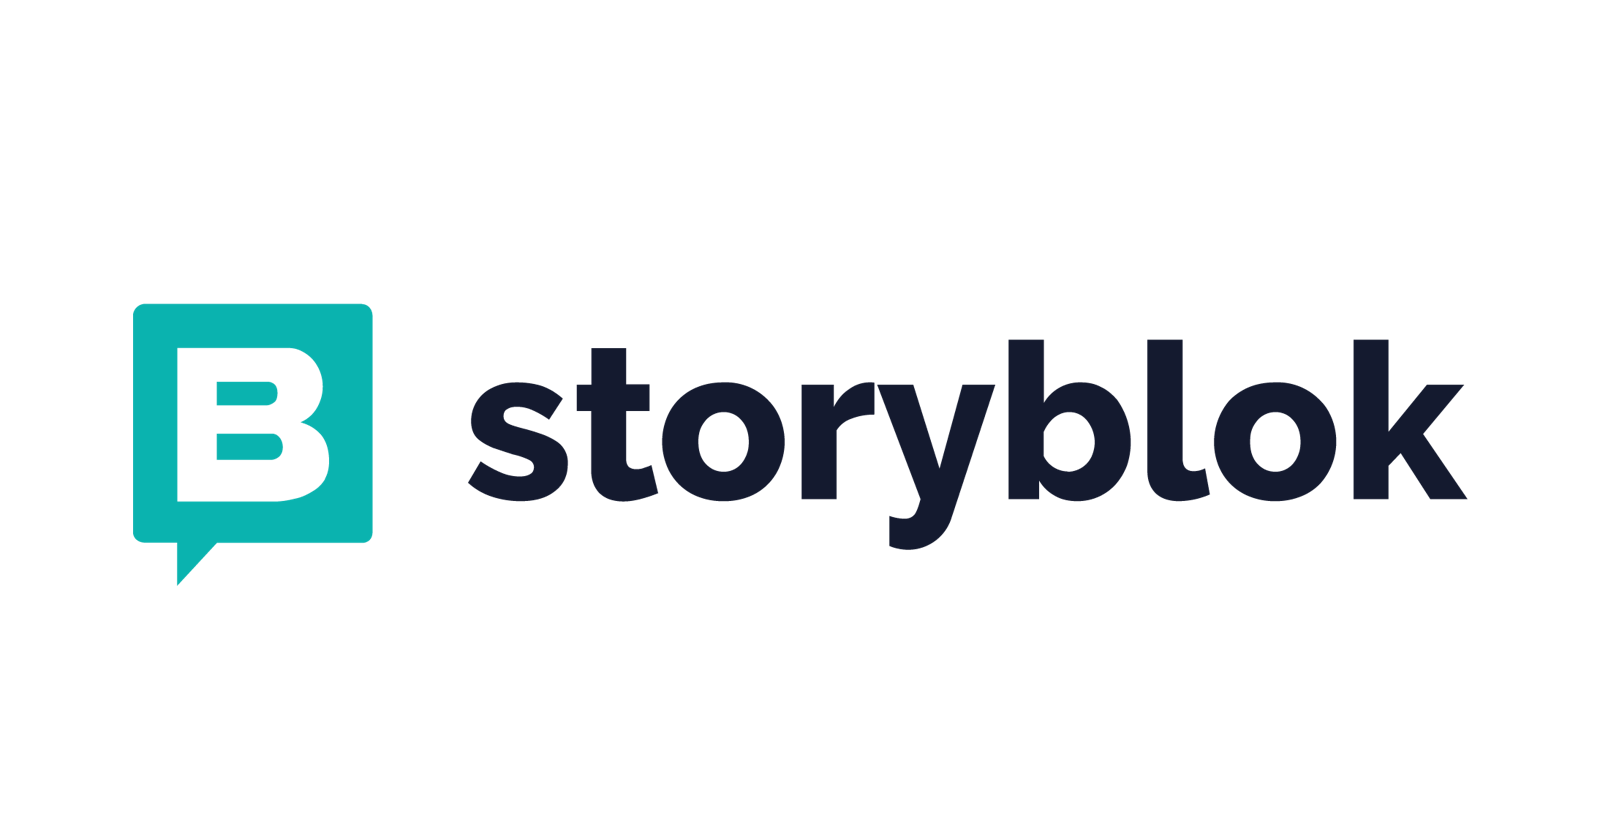 Storyblok: The Headless CMS that takes your content to the next level